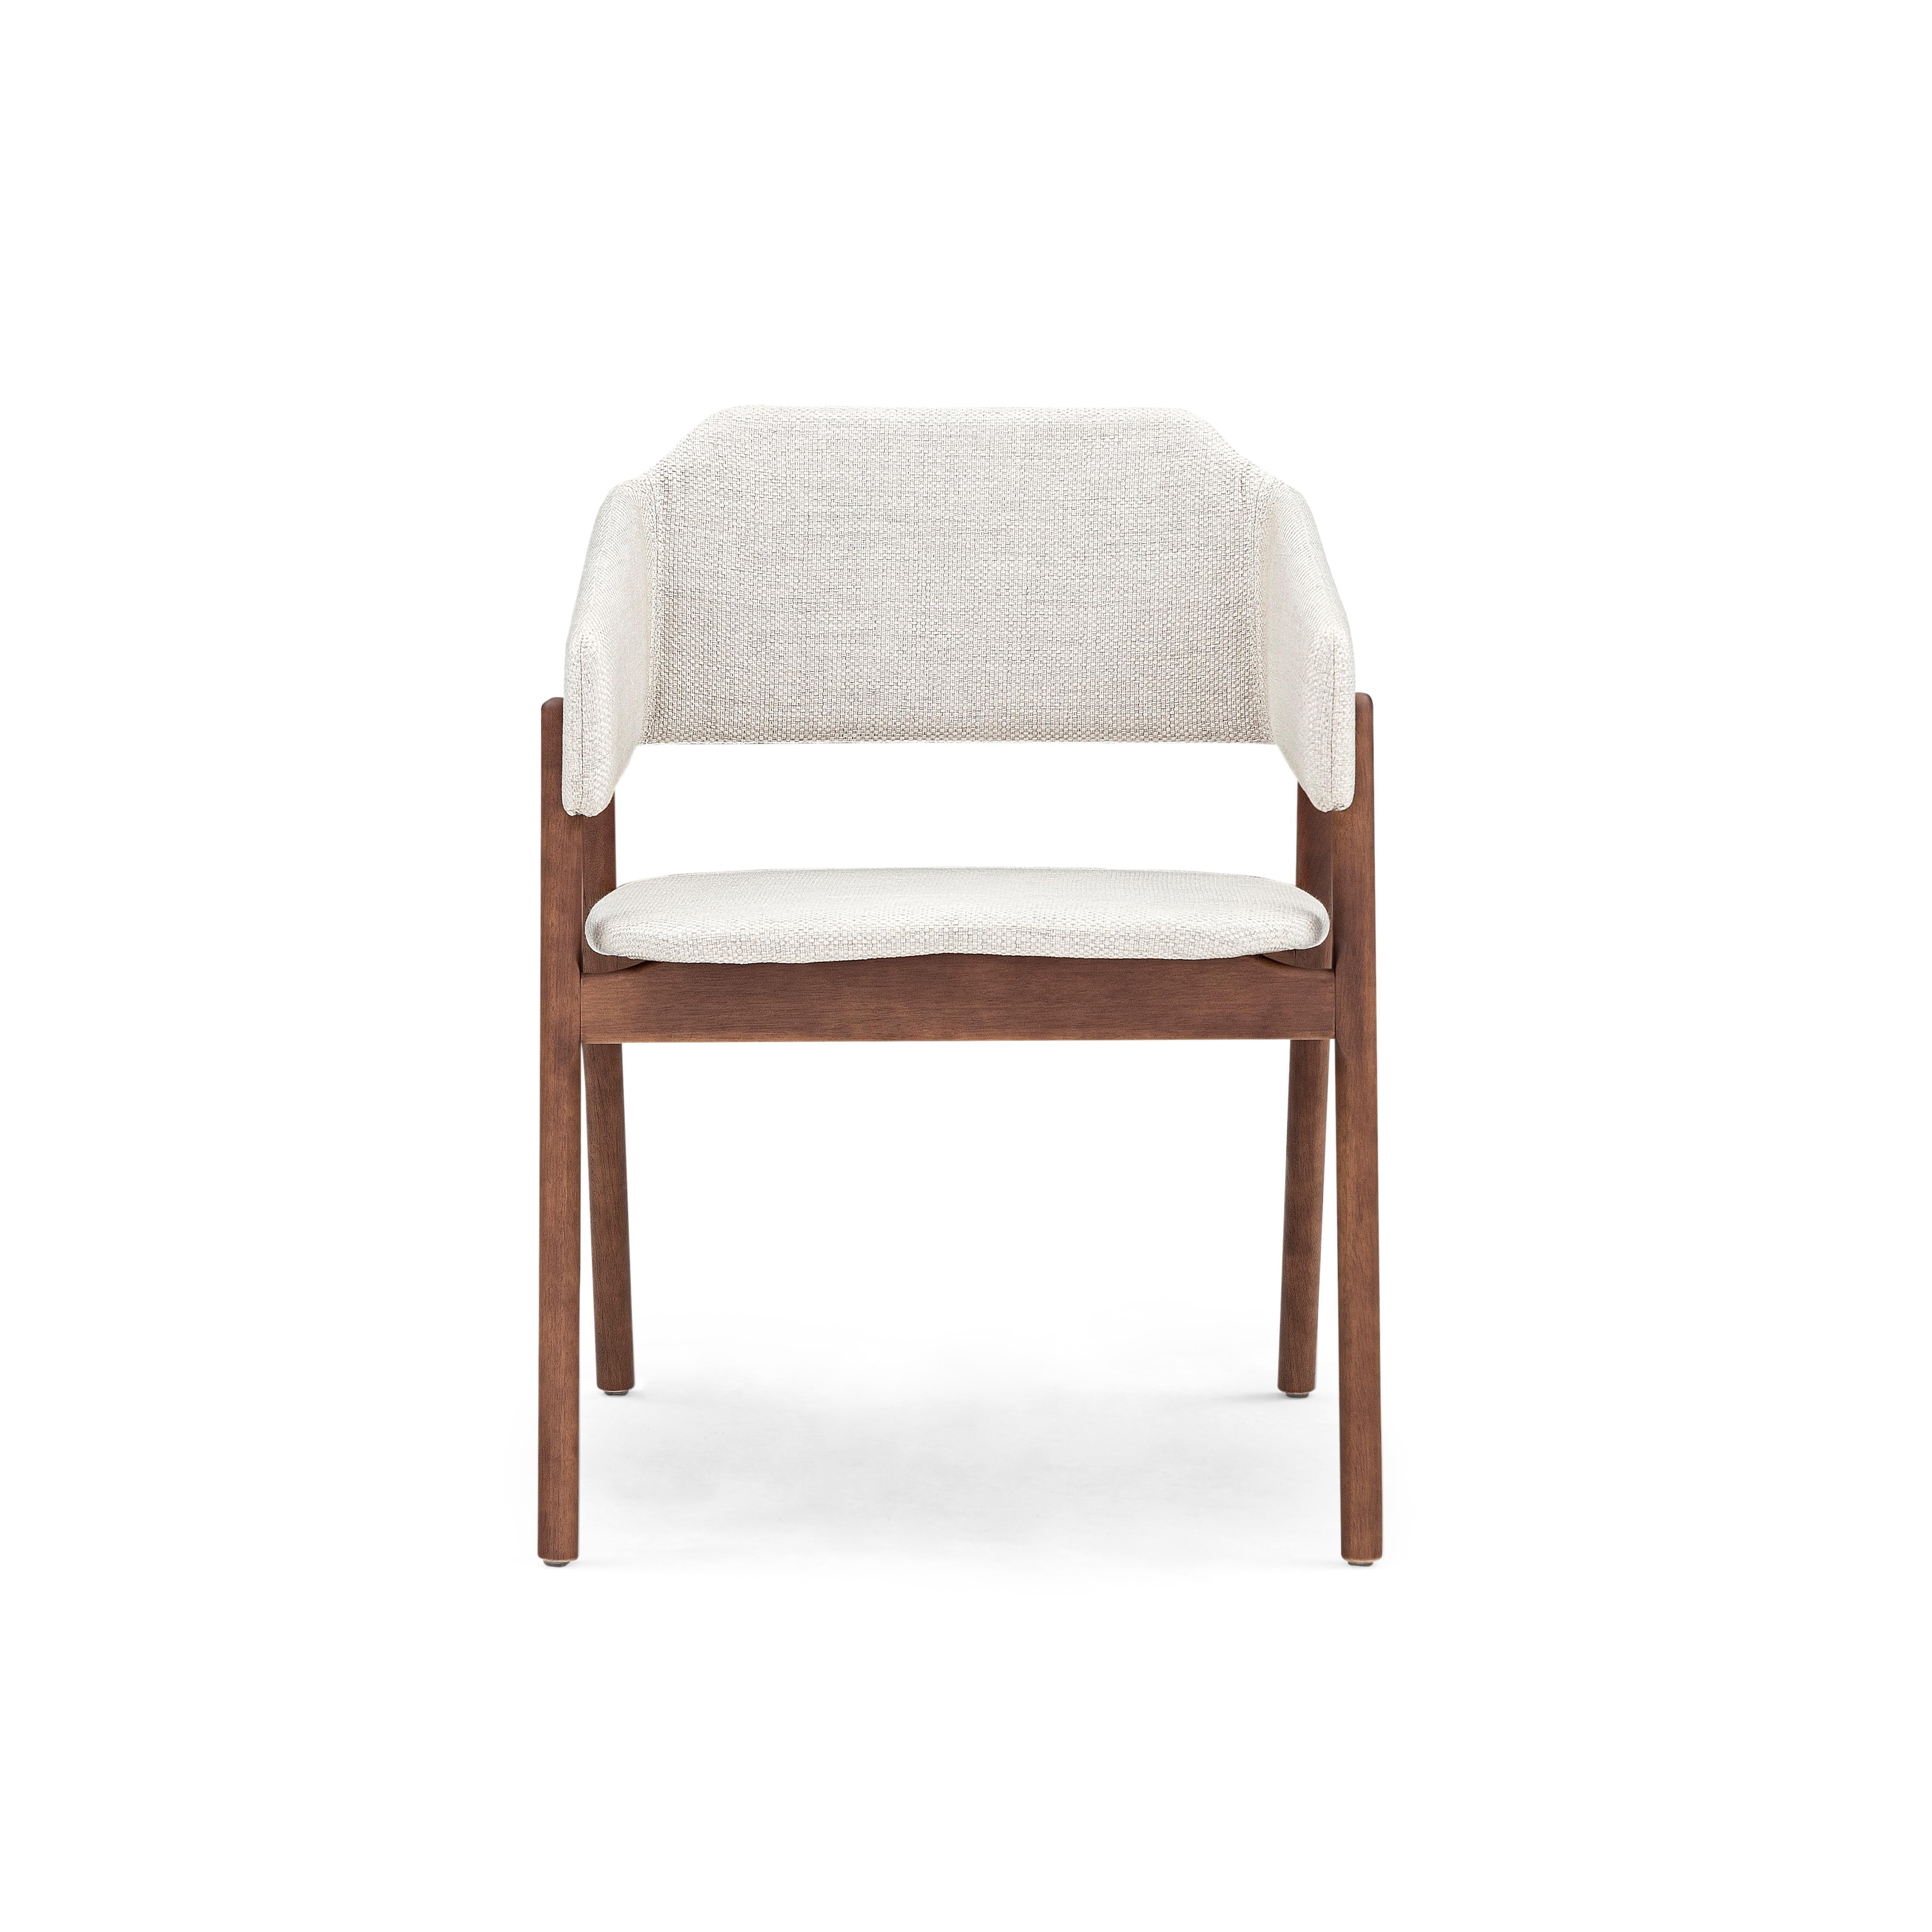 Stuzi Chair in Walnut Wood Finish with an Off-White Fabric For Sale 1